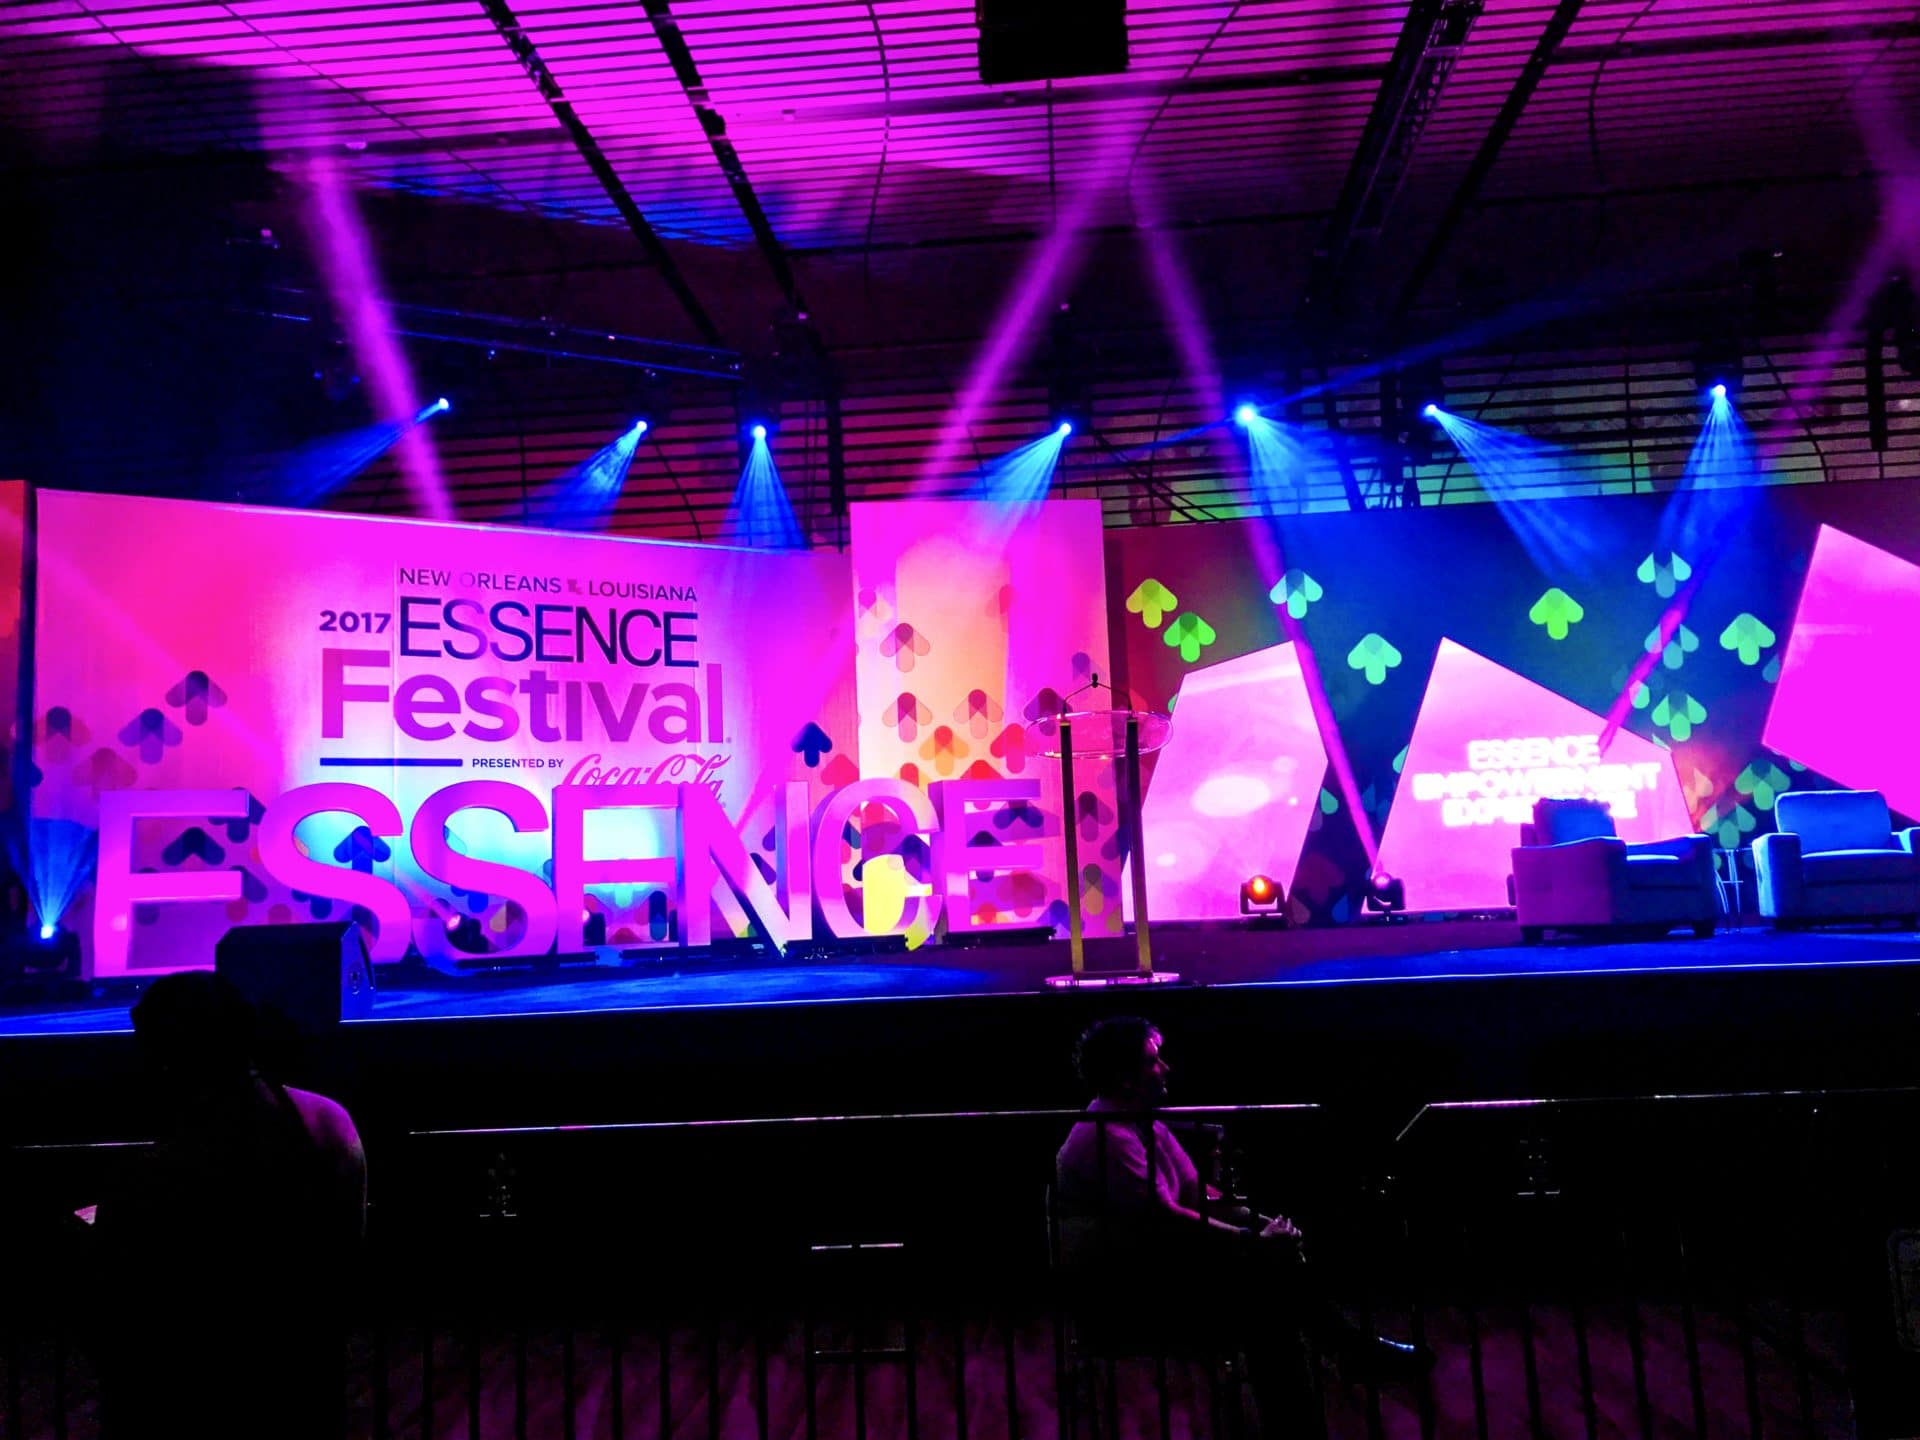 Essence Festival 2019: Here's A Sneak Peek Of Our 25 New Experiences In Celebration Of 25 Years!